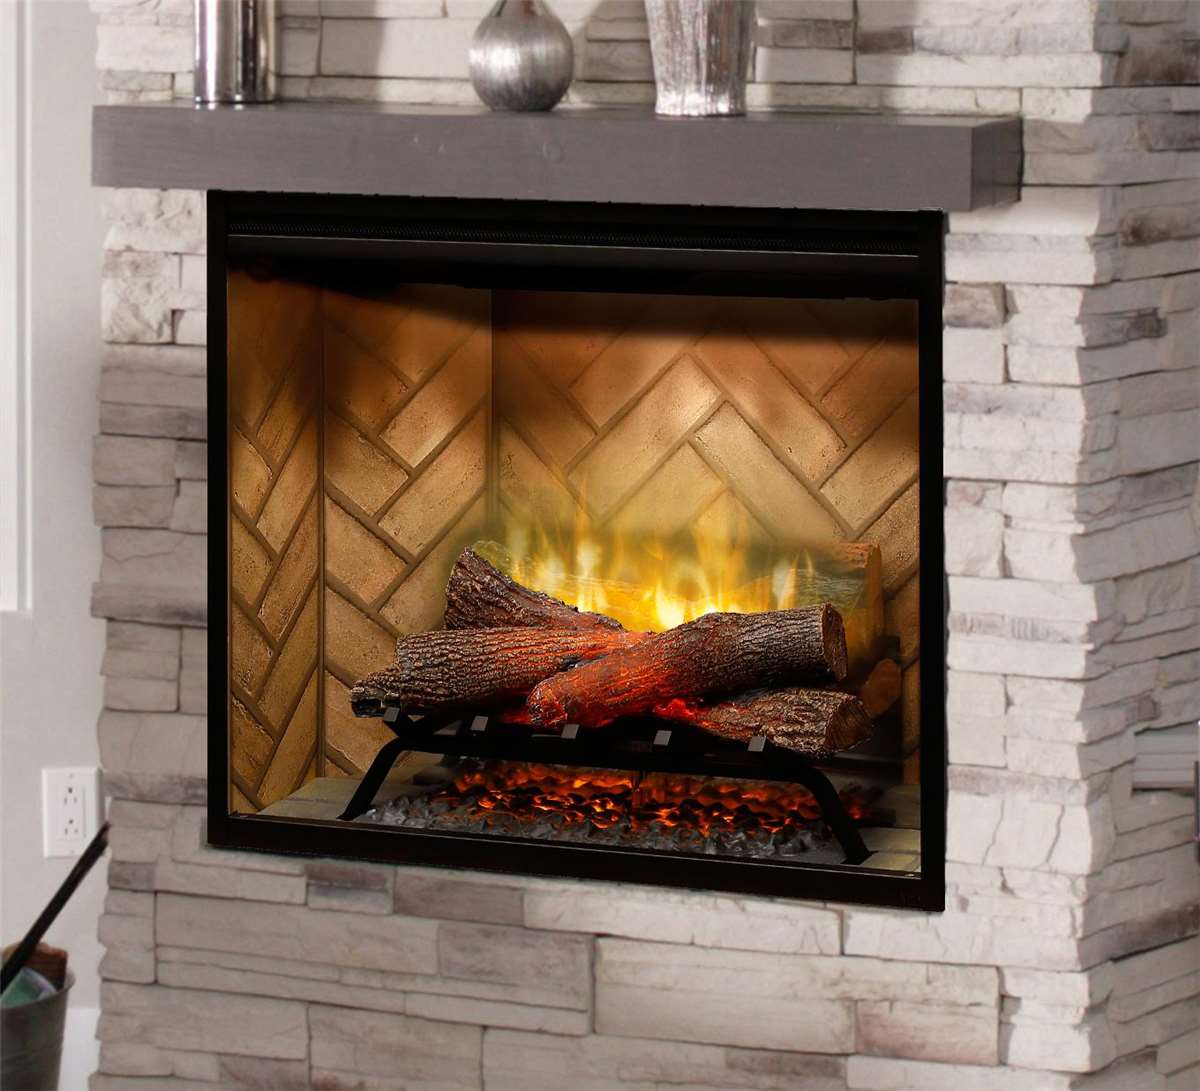 Revillusion 30" built-in electric fireplace.